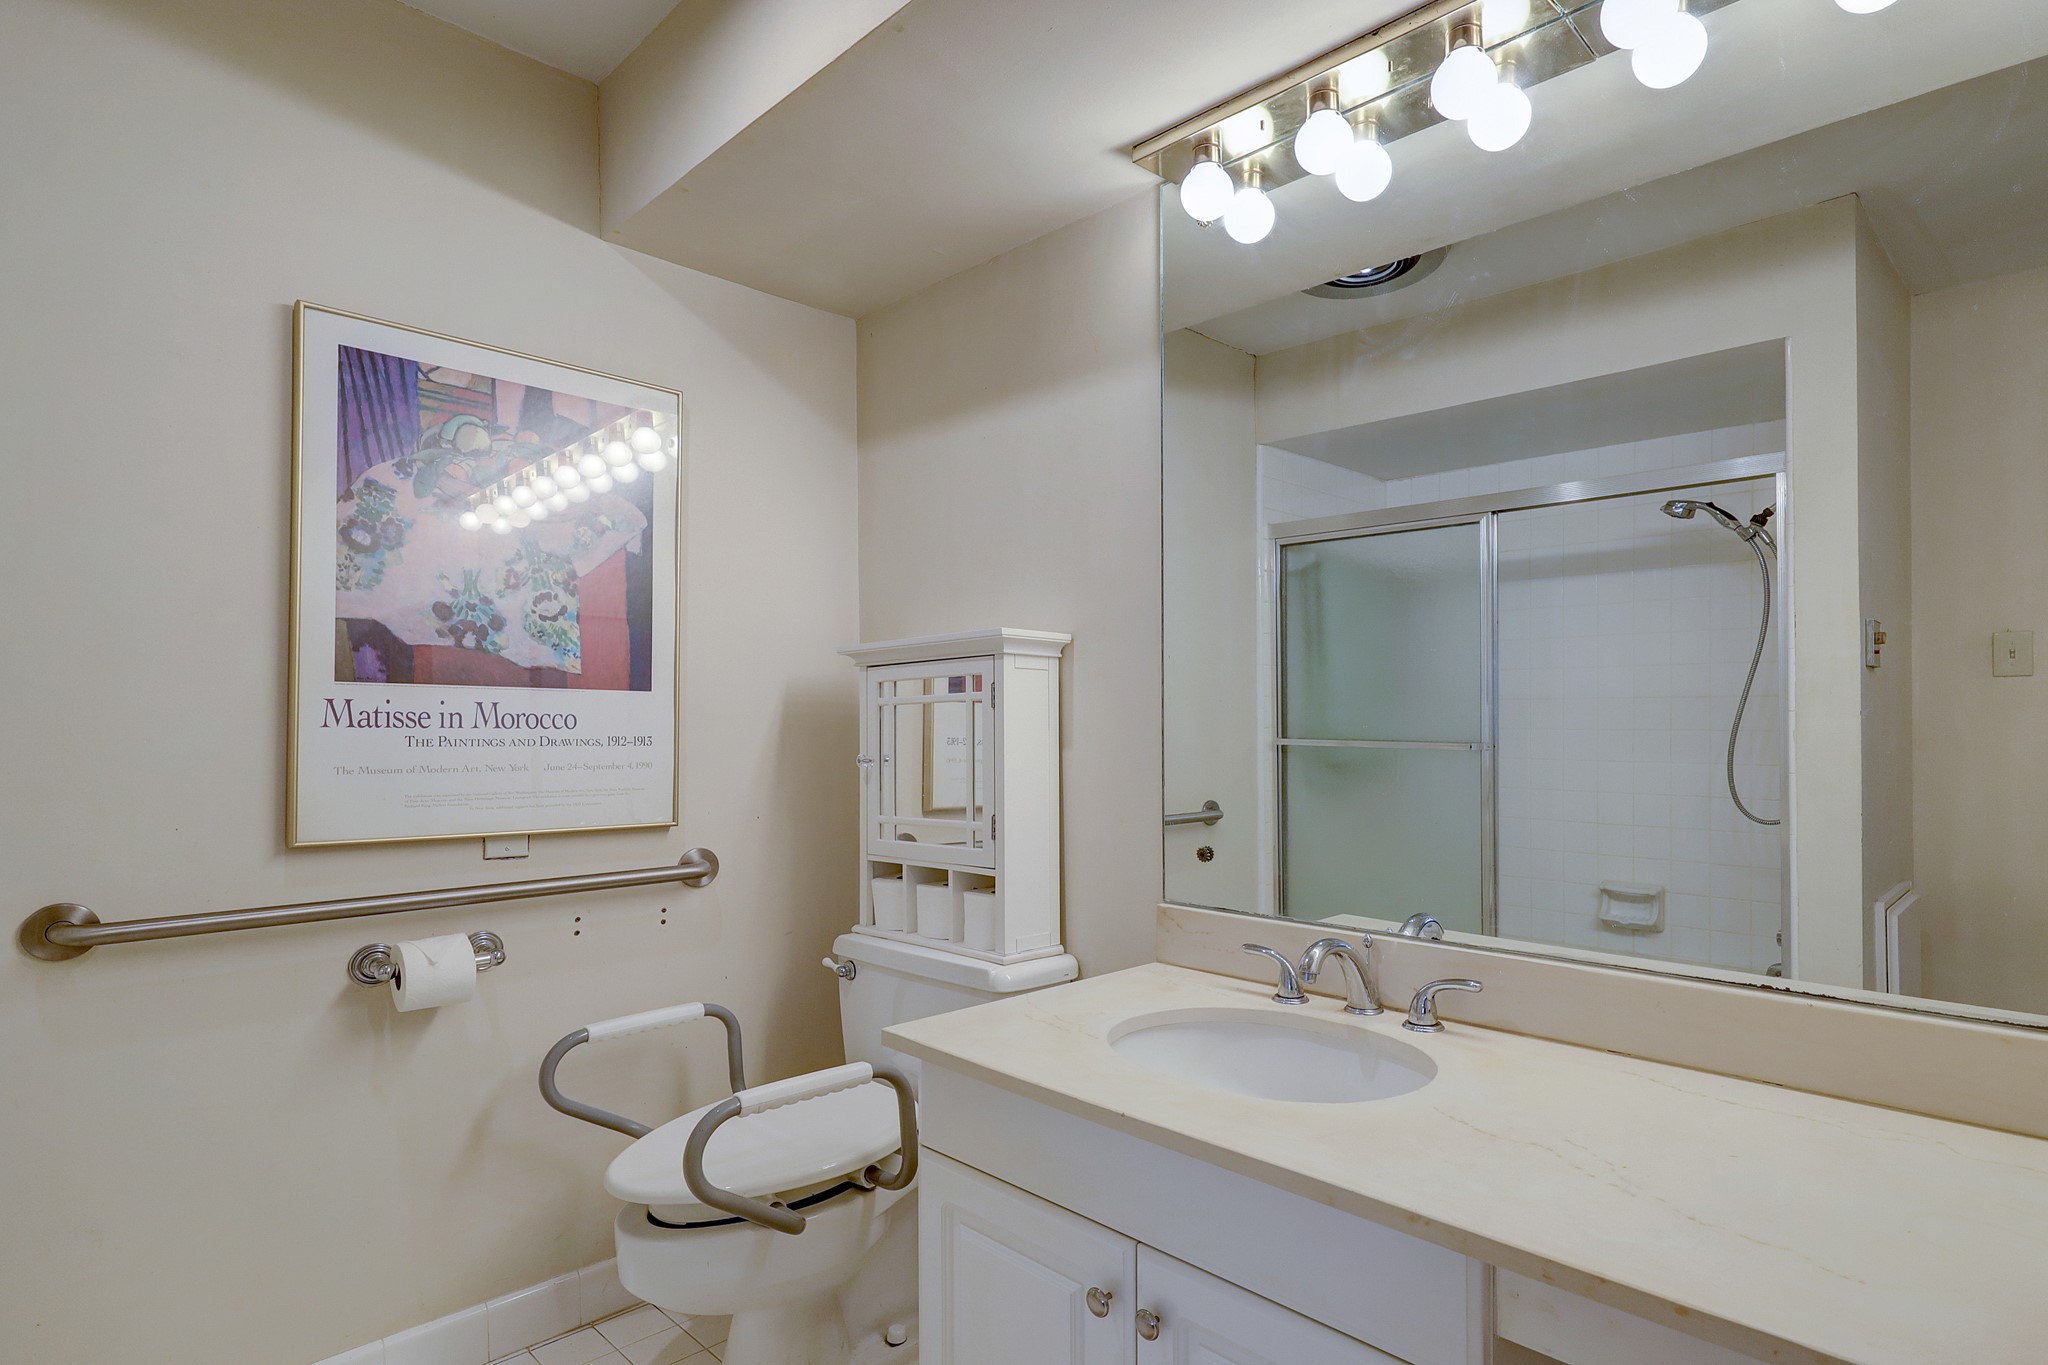 One of two en-suite primary bathrooms! Featuring plenty of counter space, under sink storage, a sizable shower/bathtub combo, and bright lights above the mirror.